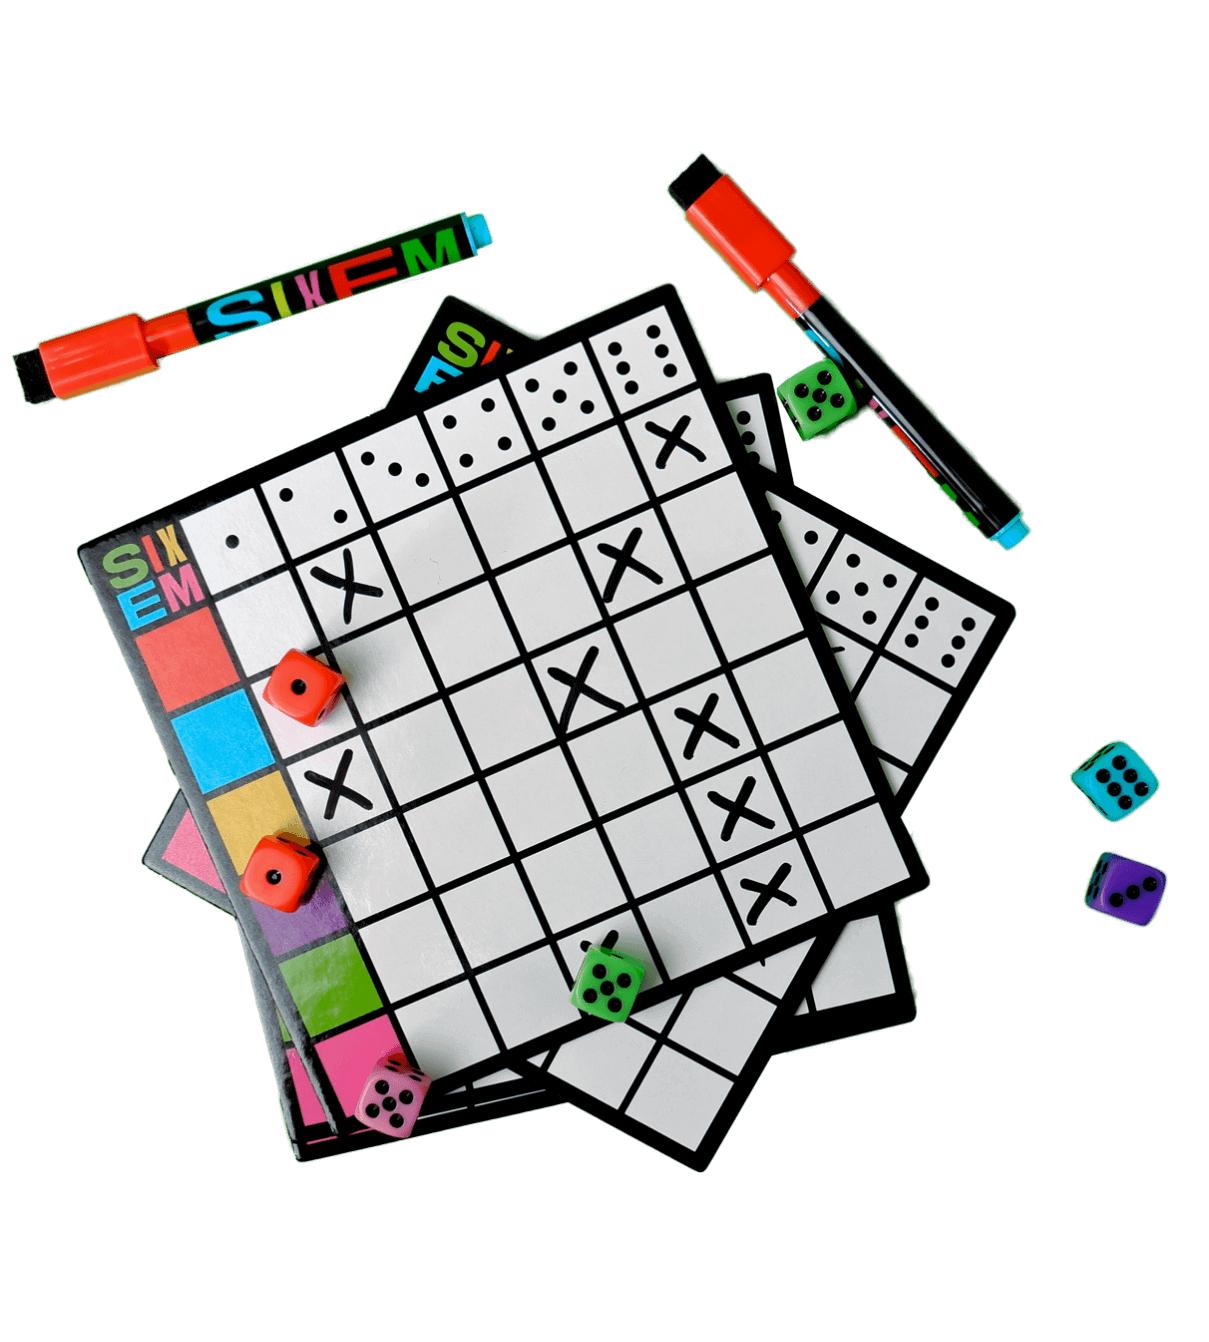 Image of the SIXEM dry erase boards with X's marked on them, markers, and dice on a transparent background